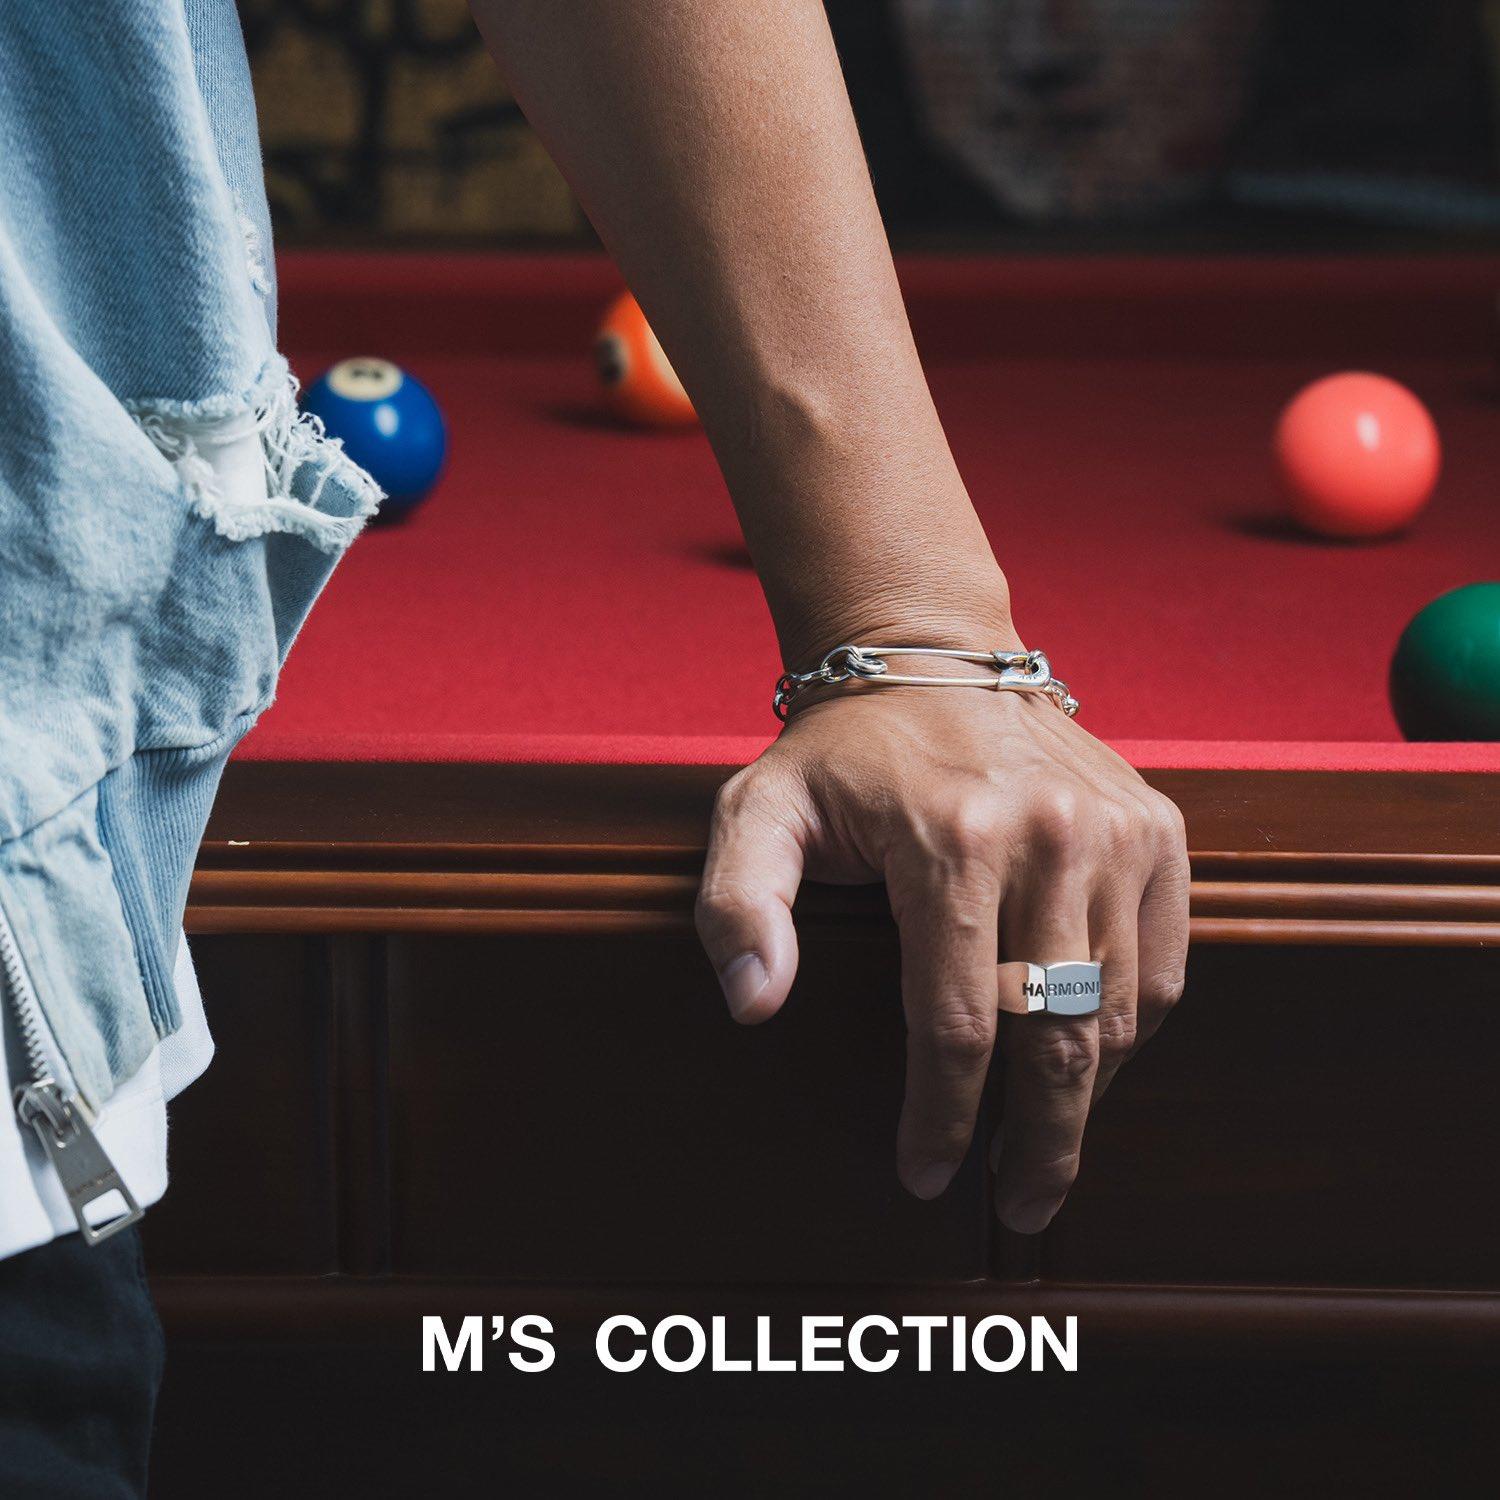 M'S COLLECTION